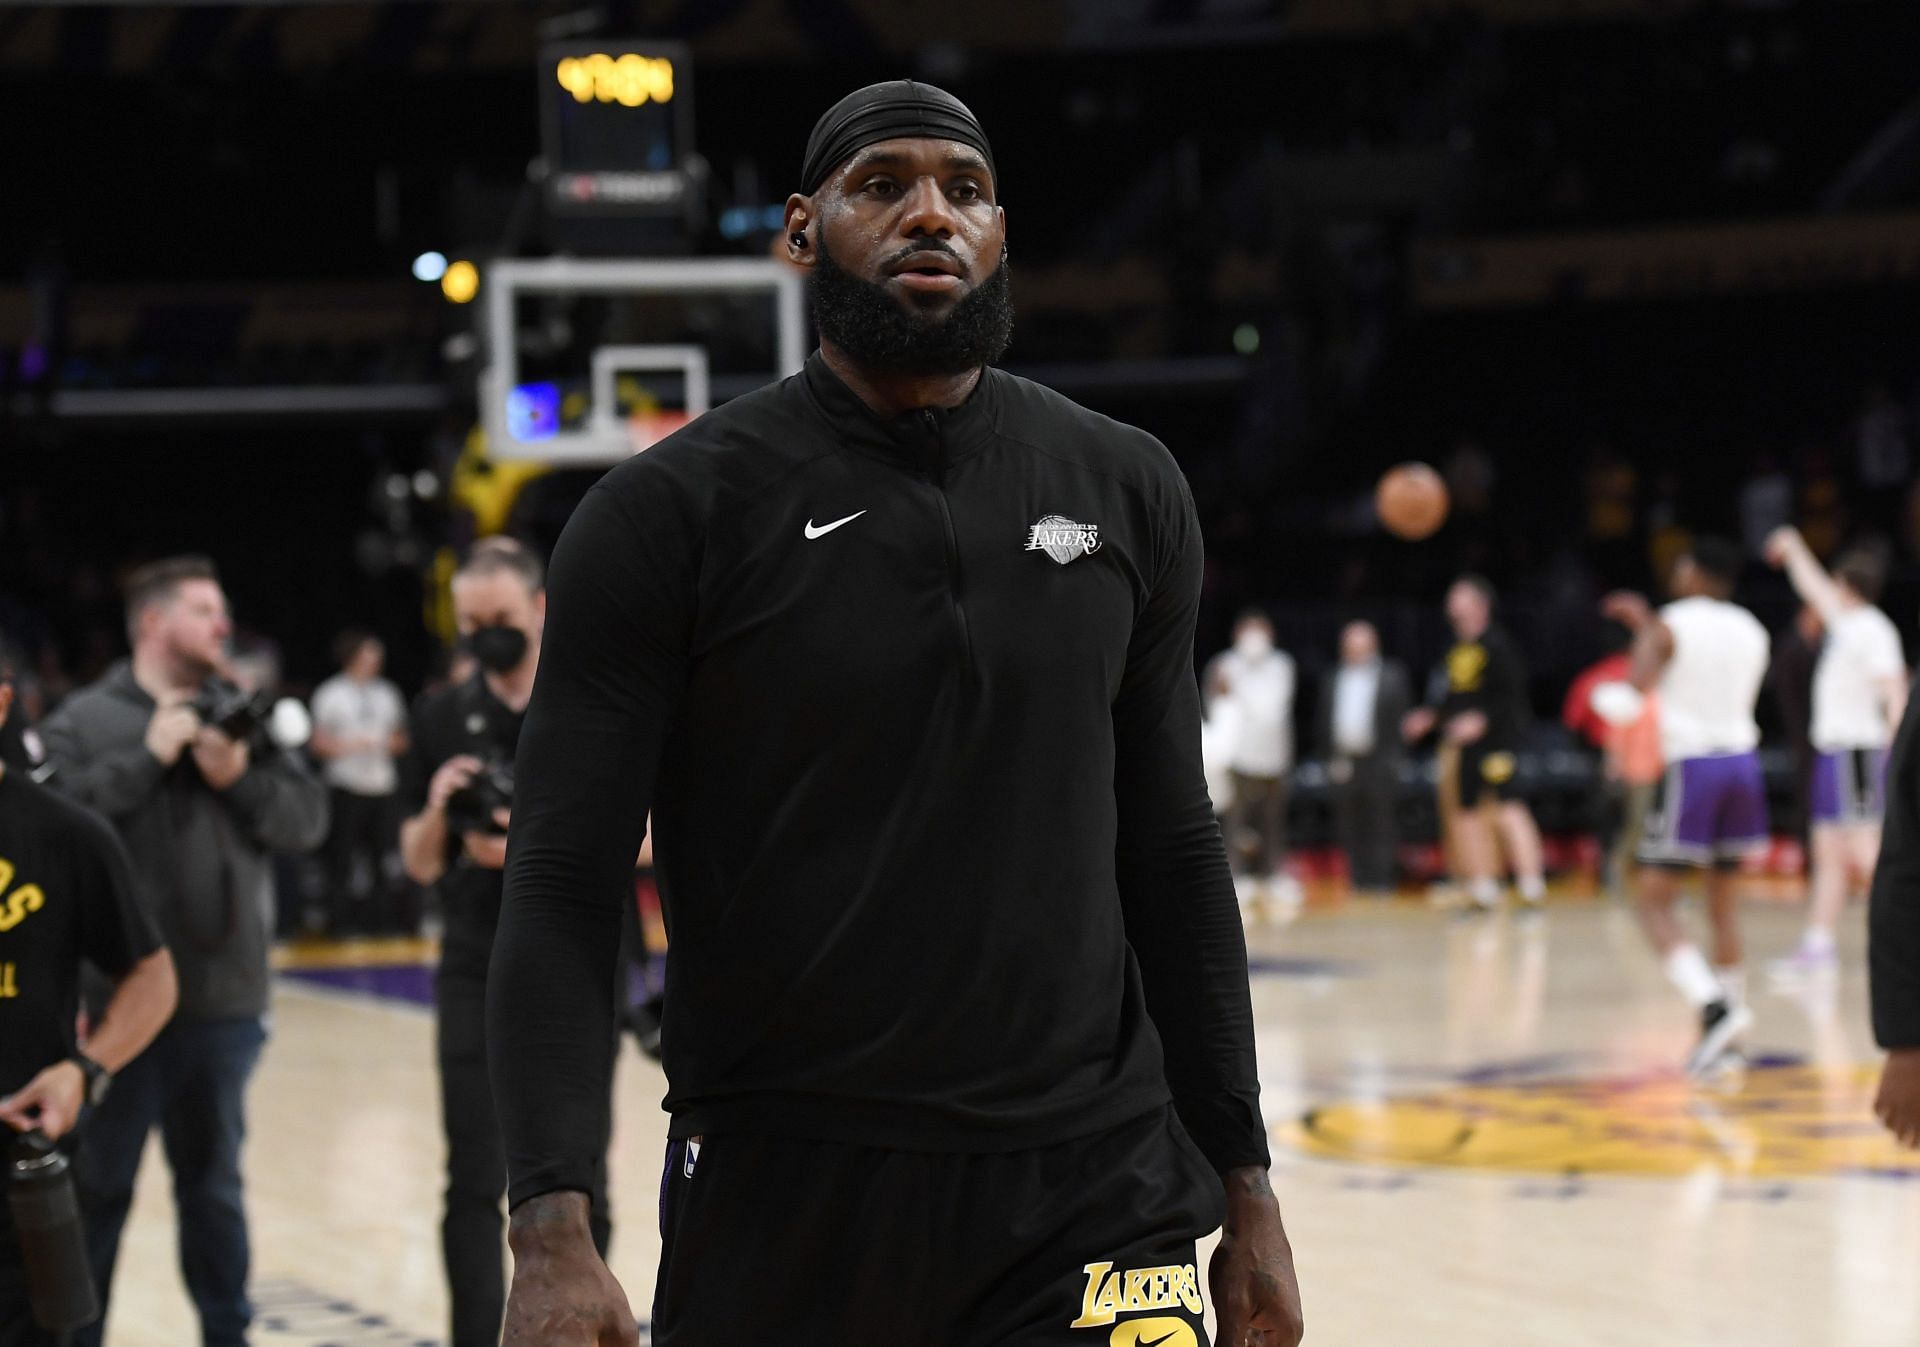 LeBron James of the LA Lakers warms up ahead of a match